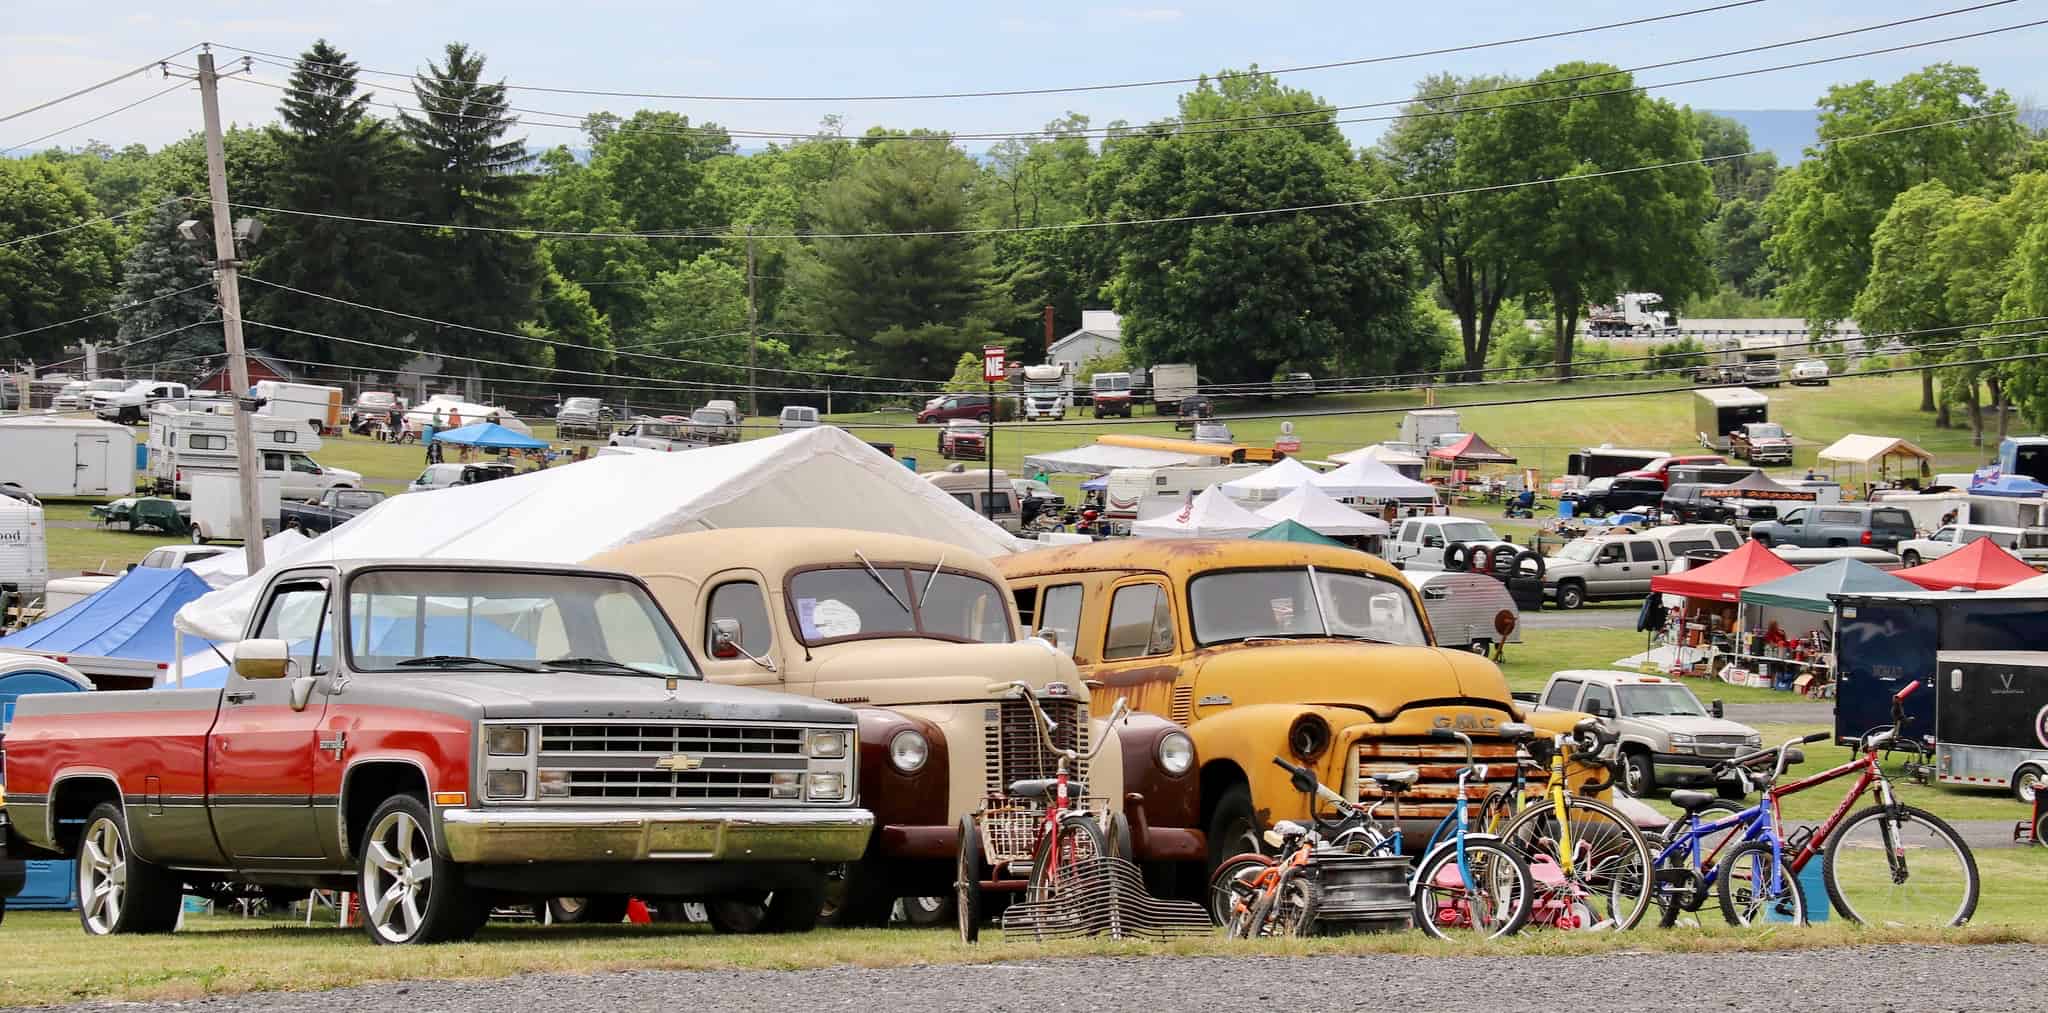 Carlisle, Carlisle Events reflects on Spring Carlisle controversy, ClassicCars.com Journal